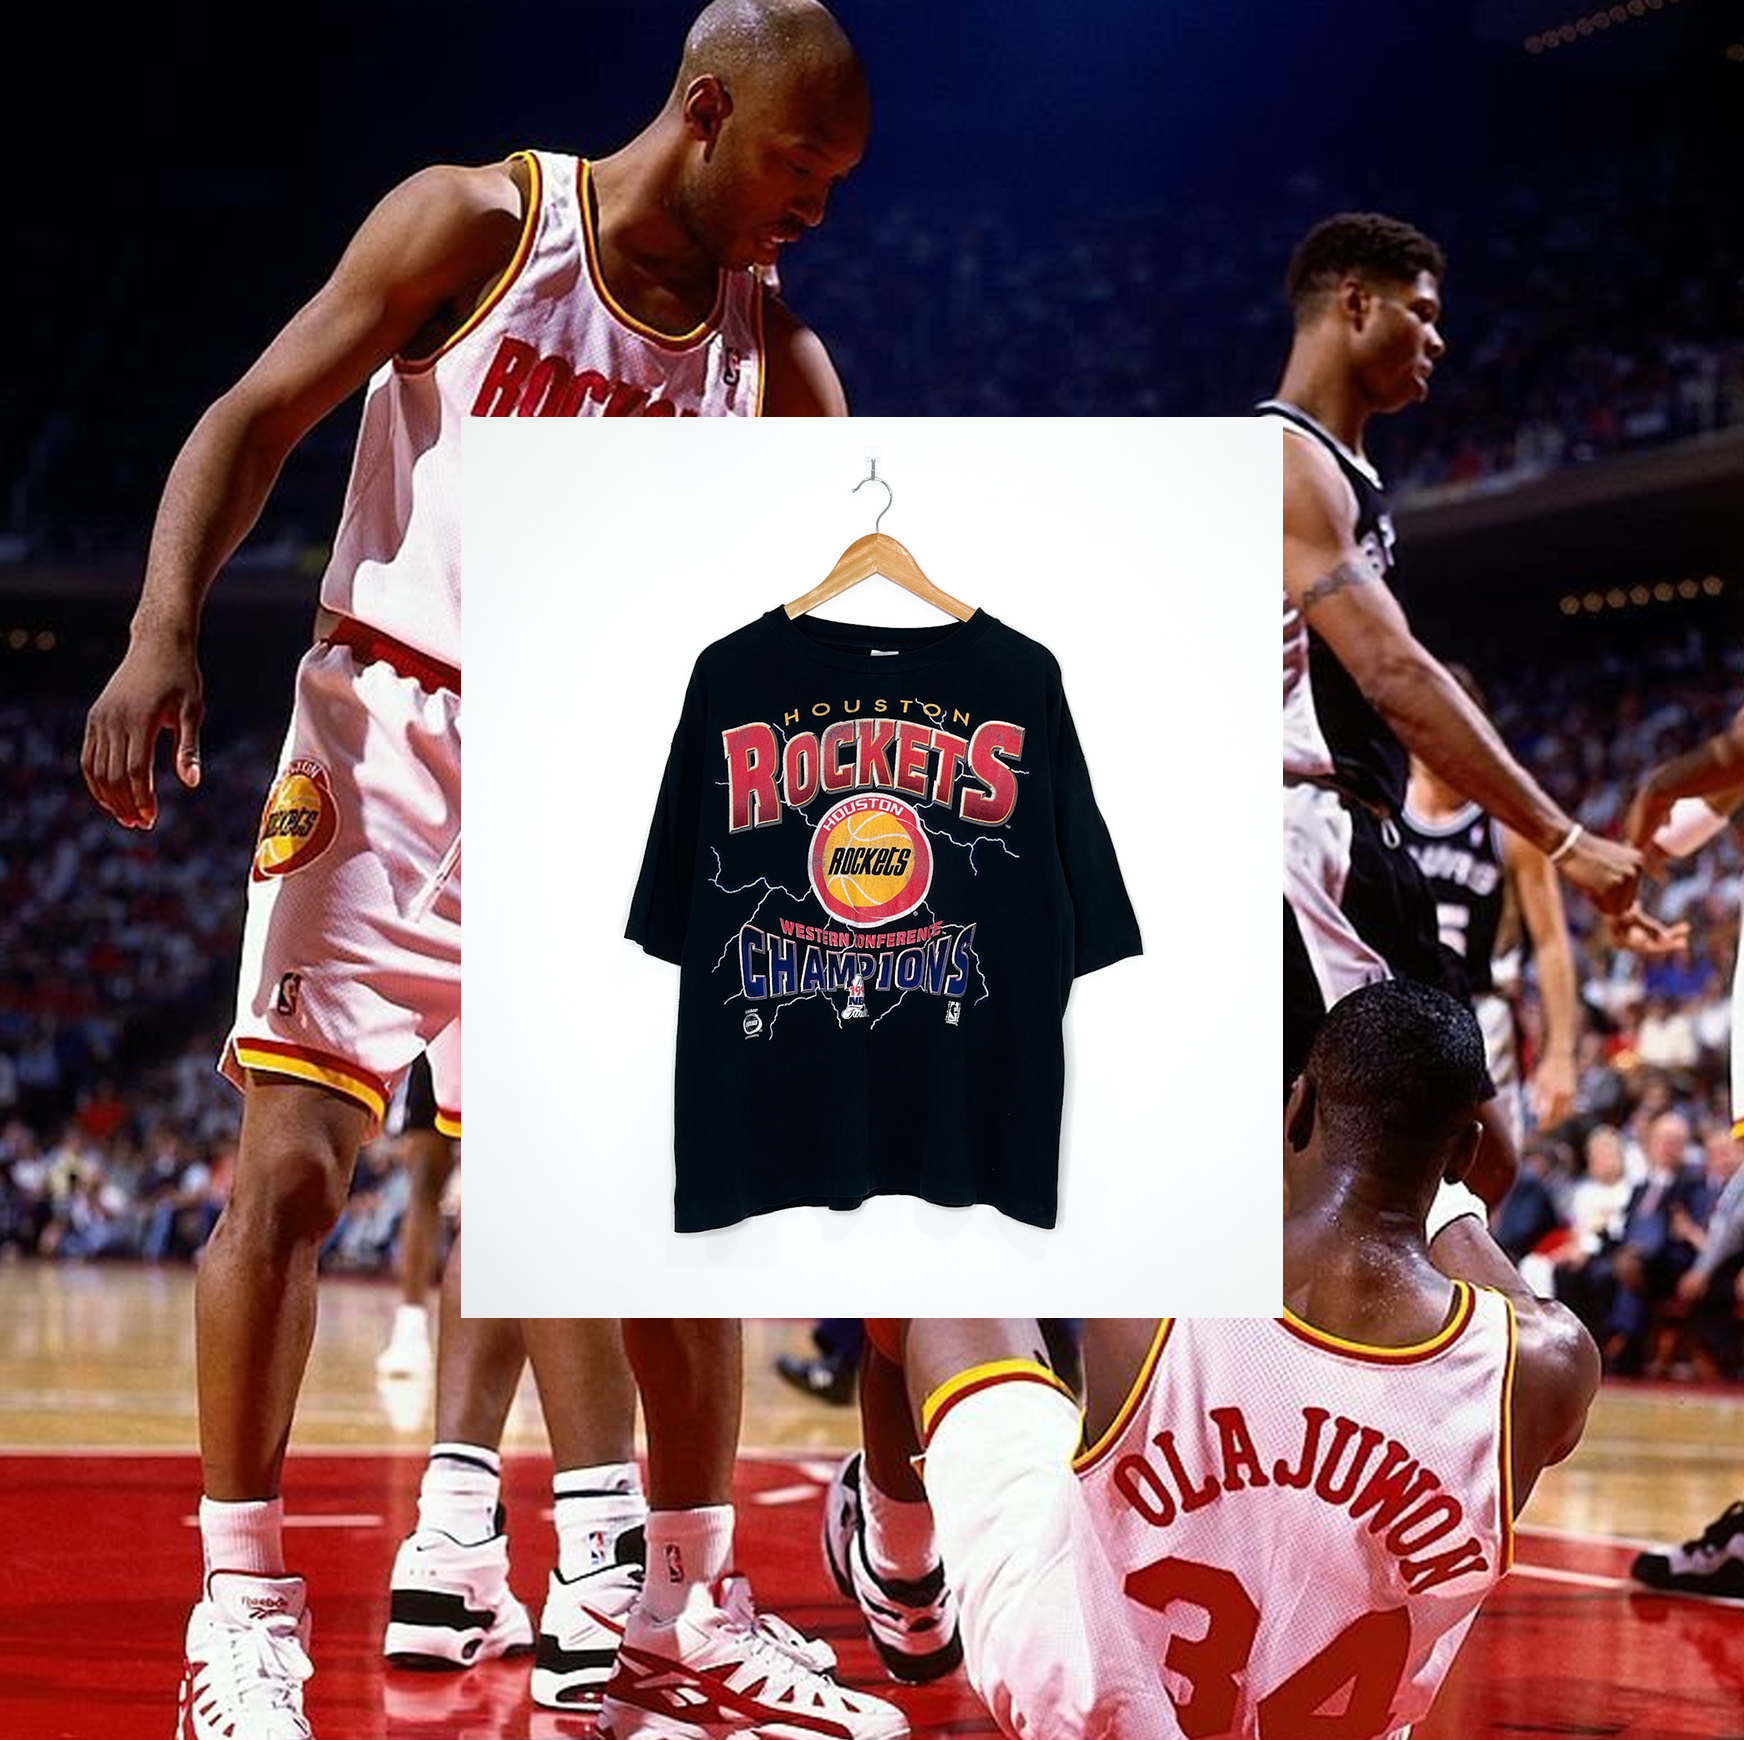 HOUSTON ROCKETS '1994 Western Conference Champions" VINTAGE LIGHTNING TEE